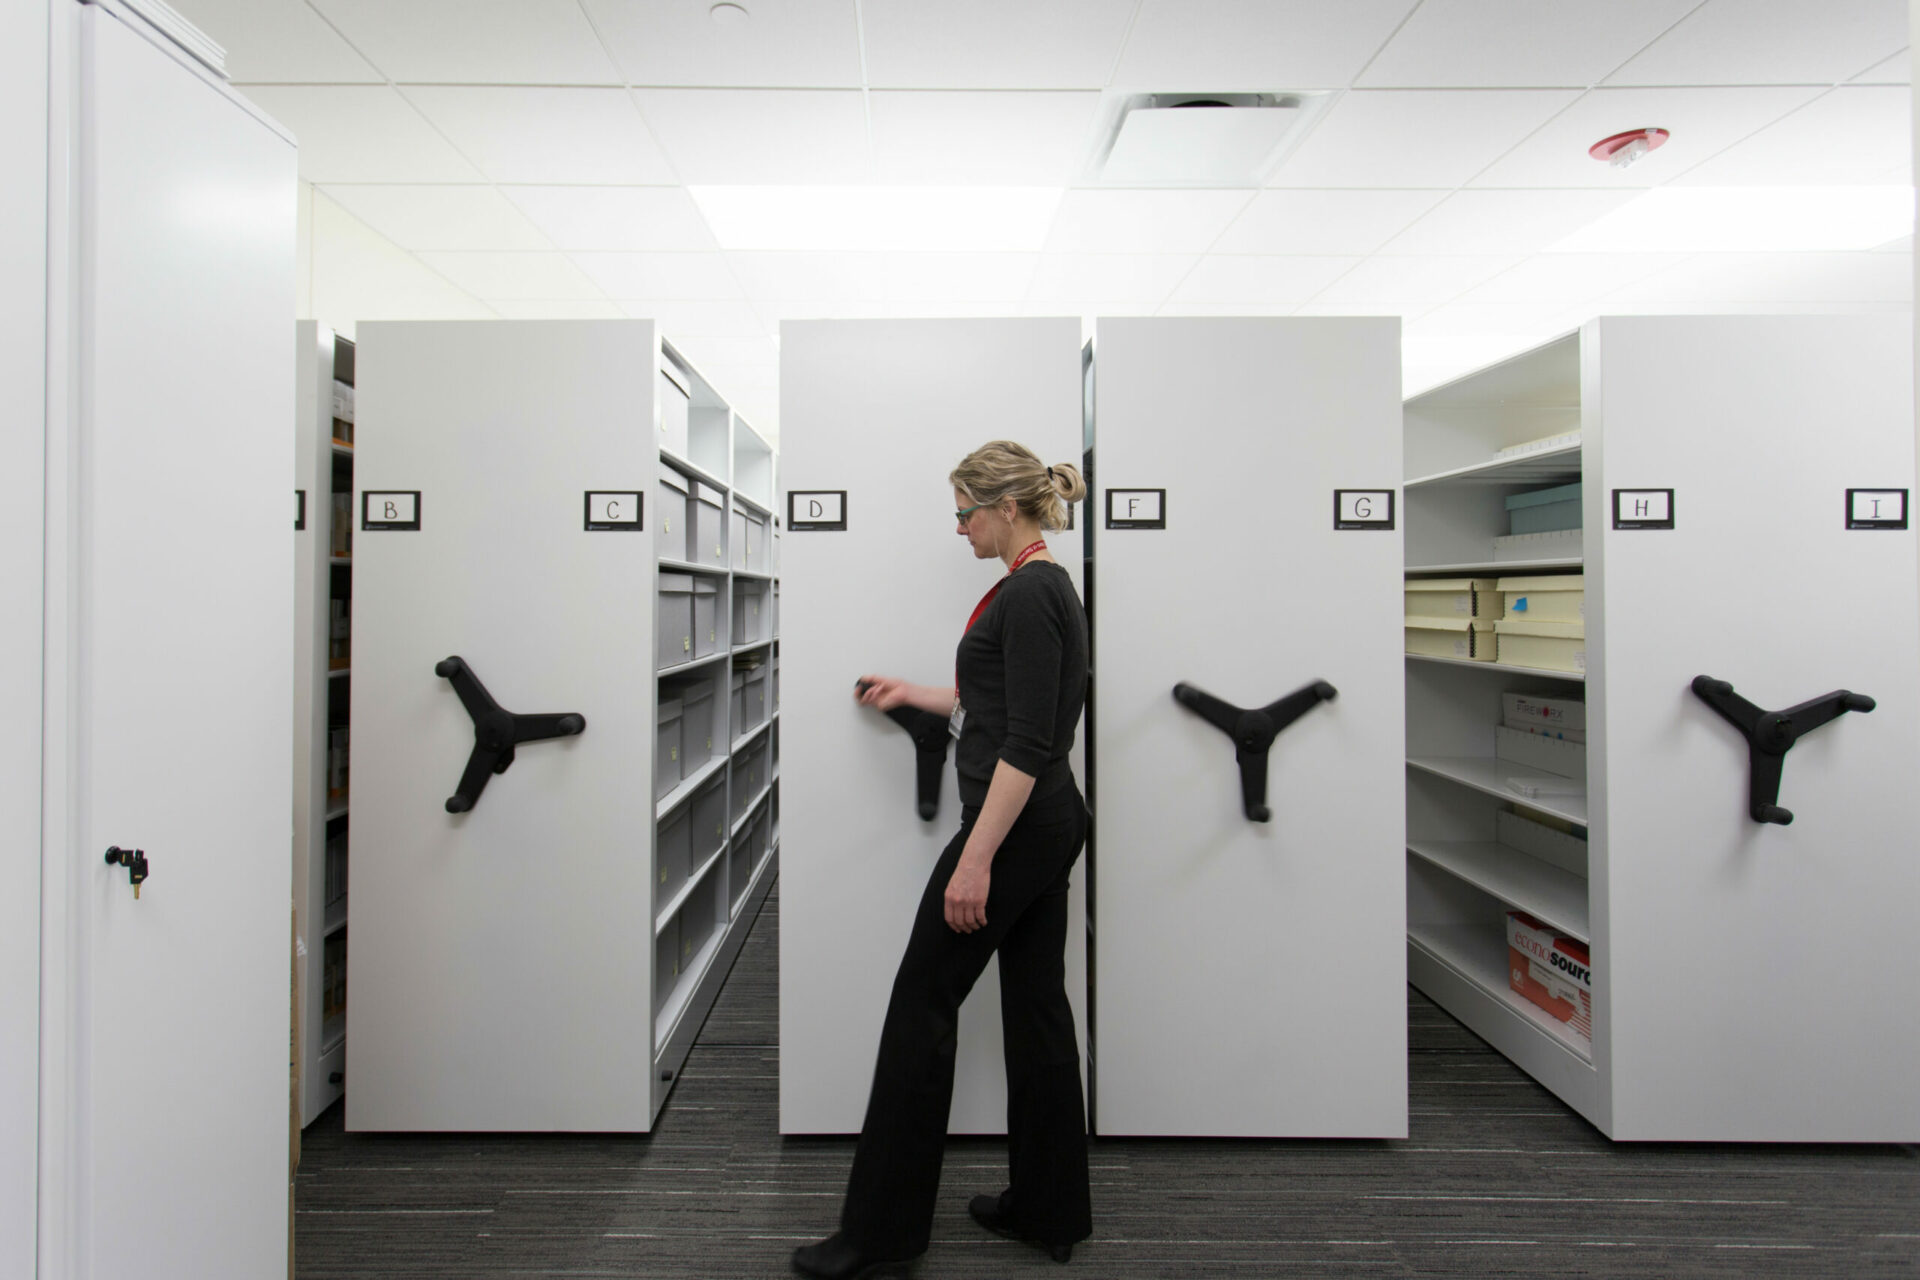 High-Density Mobile System Mechanical assist handle makes it easy to move the shelving to retrieve what you need